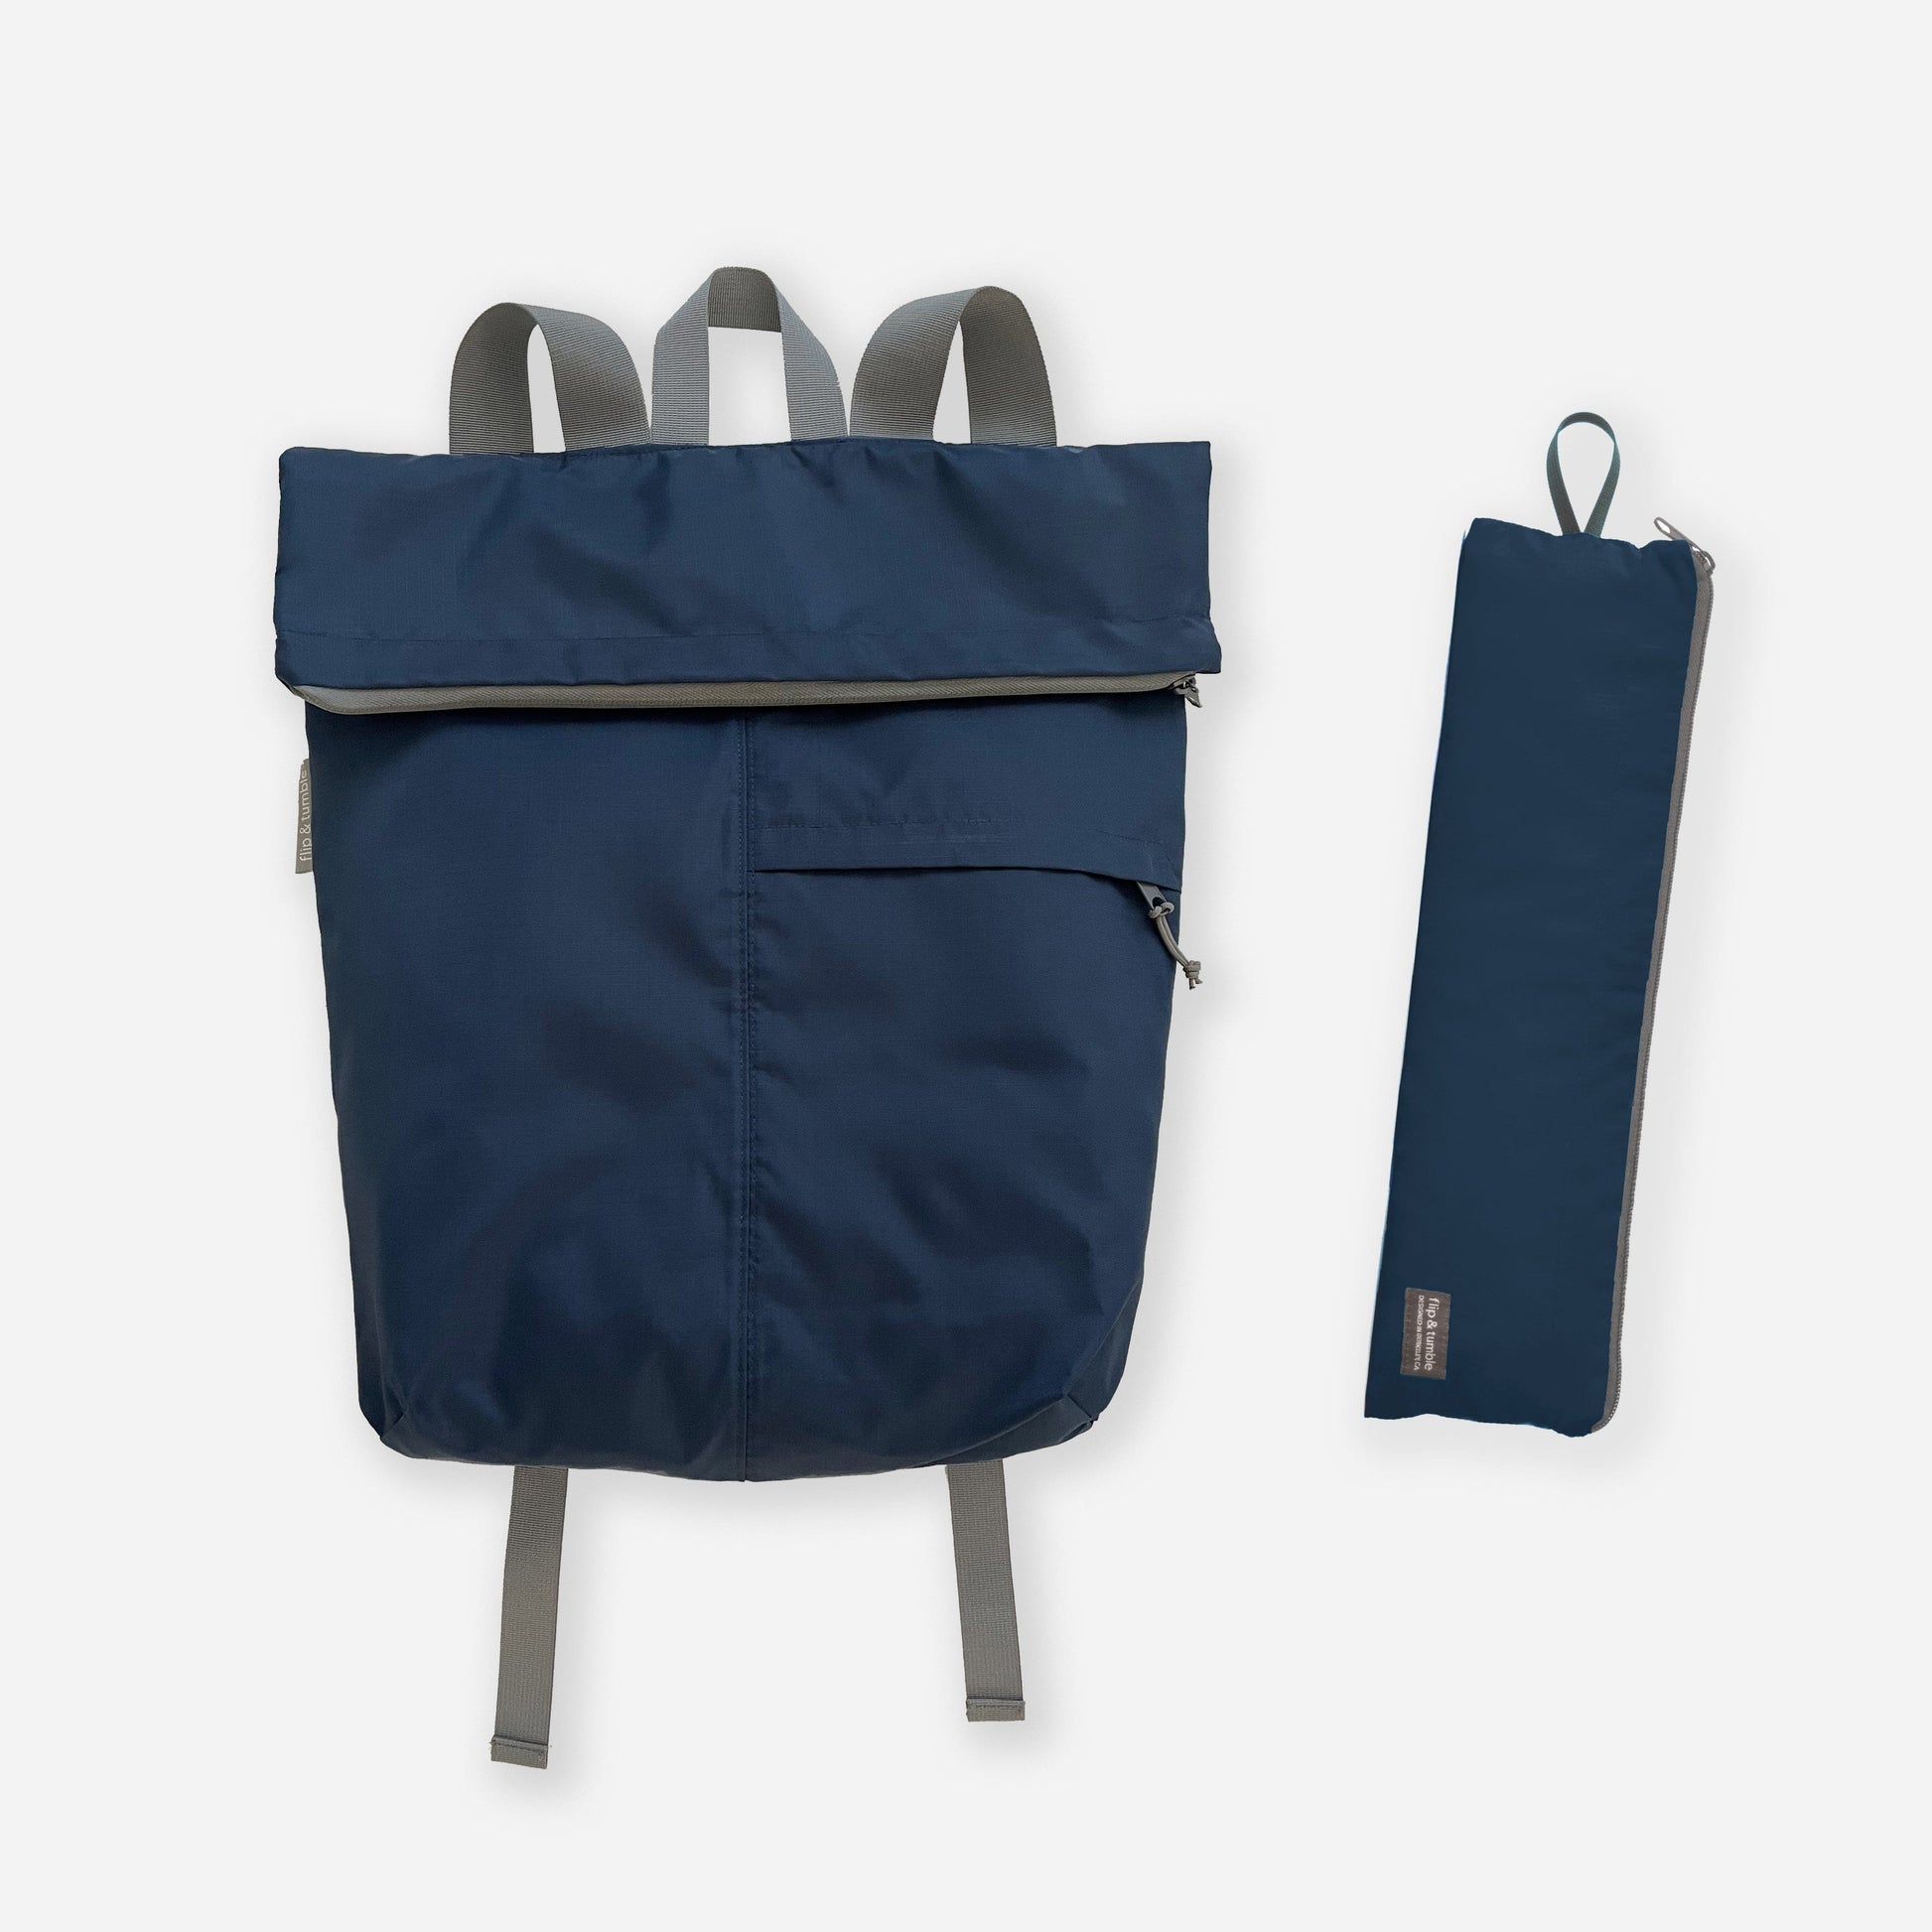 navy foldable backpack for travel - flip & tumble - best packable backpack for travel, this packable foldable rucksack style is great for travel